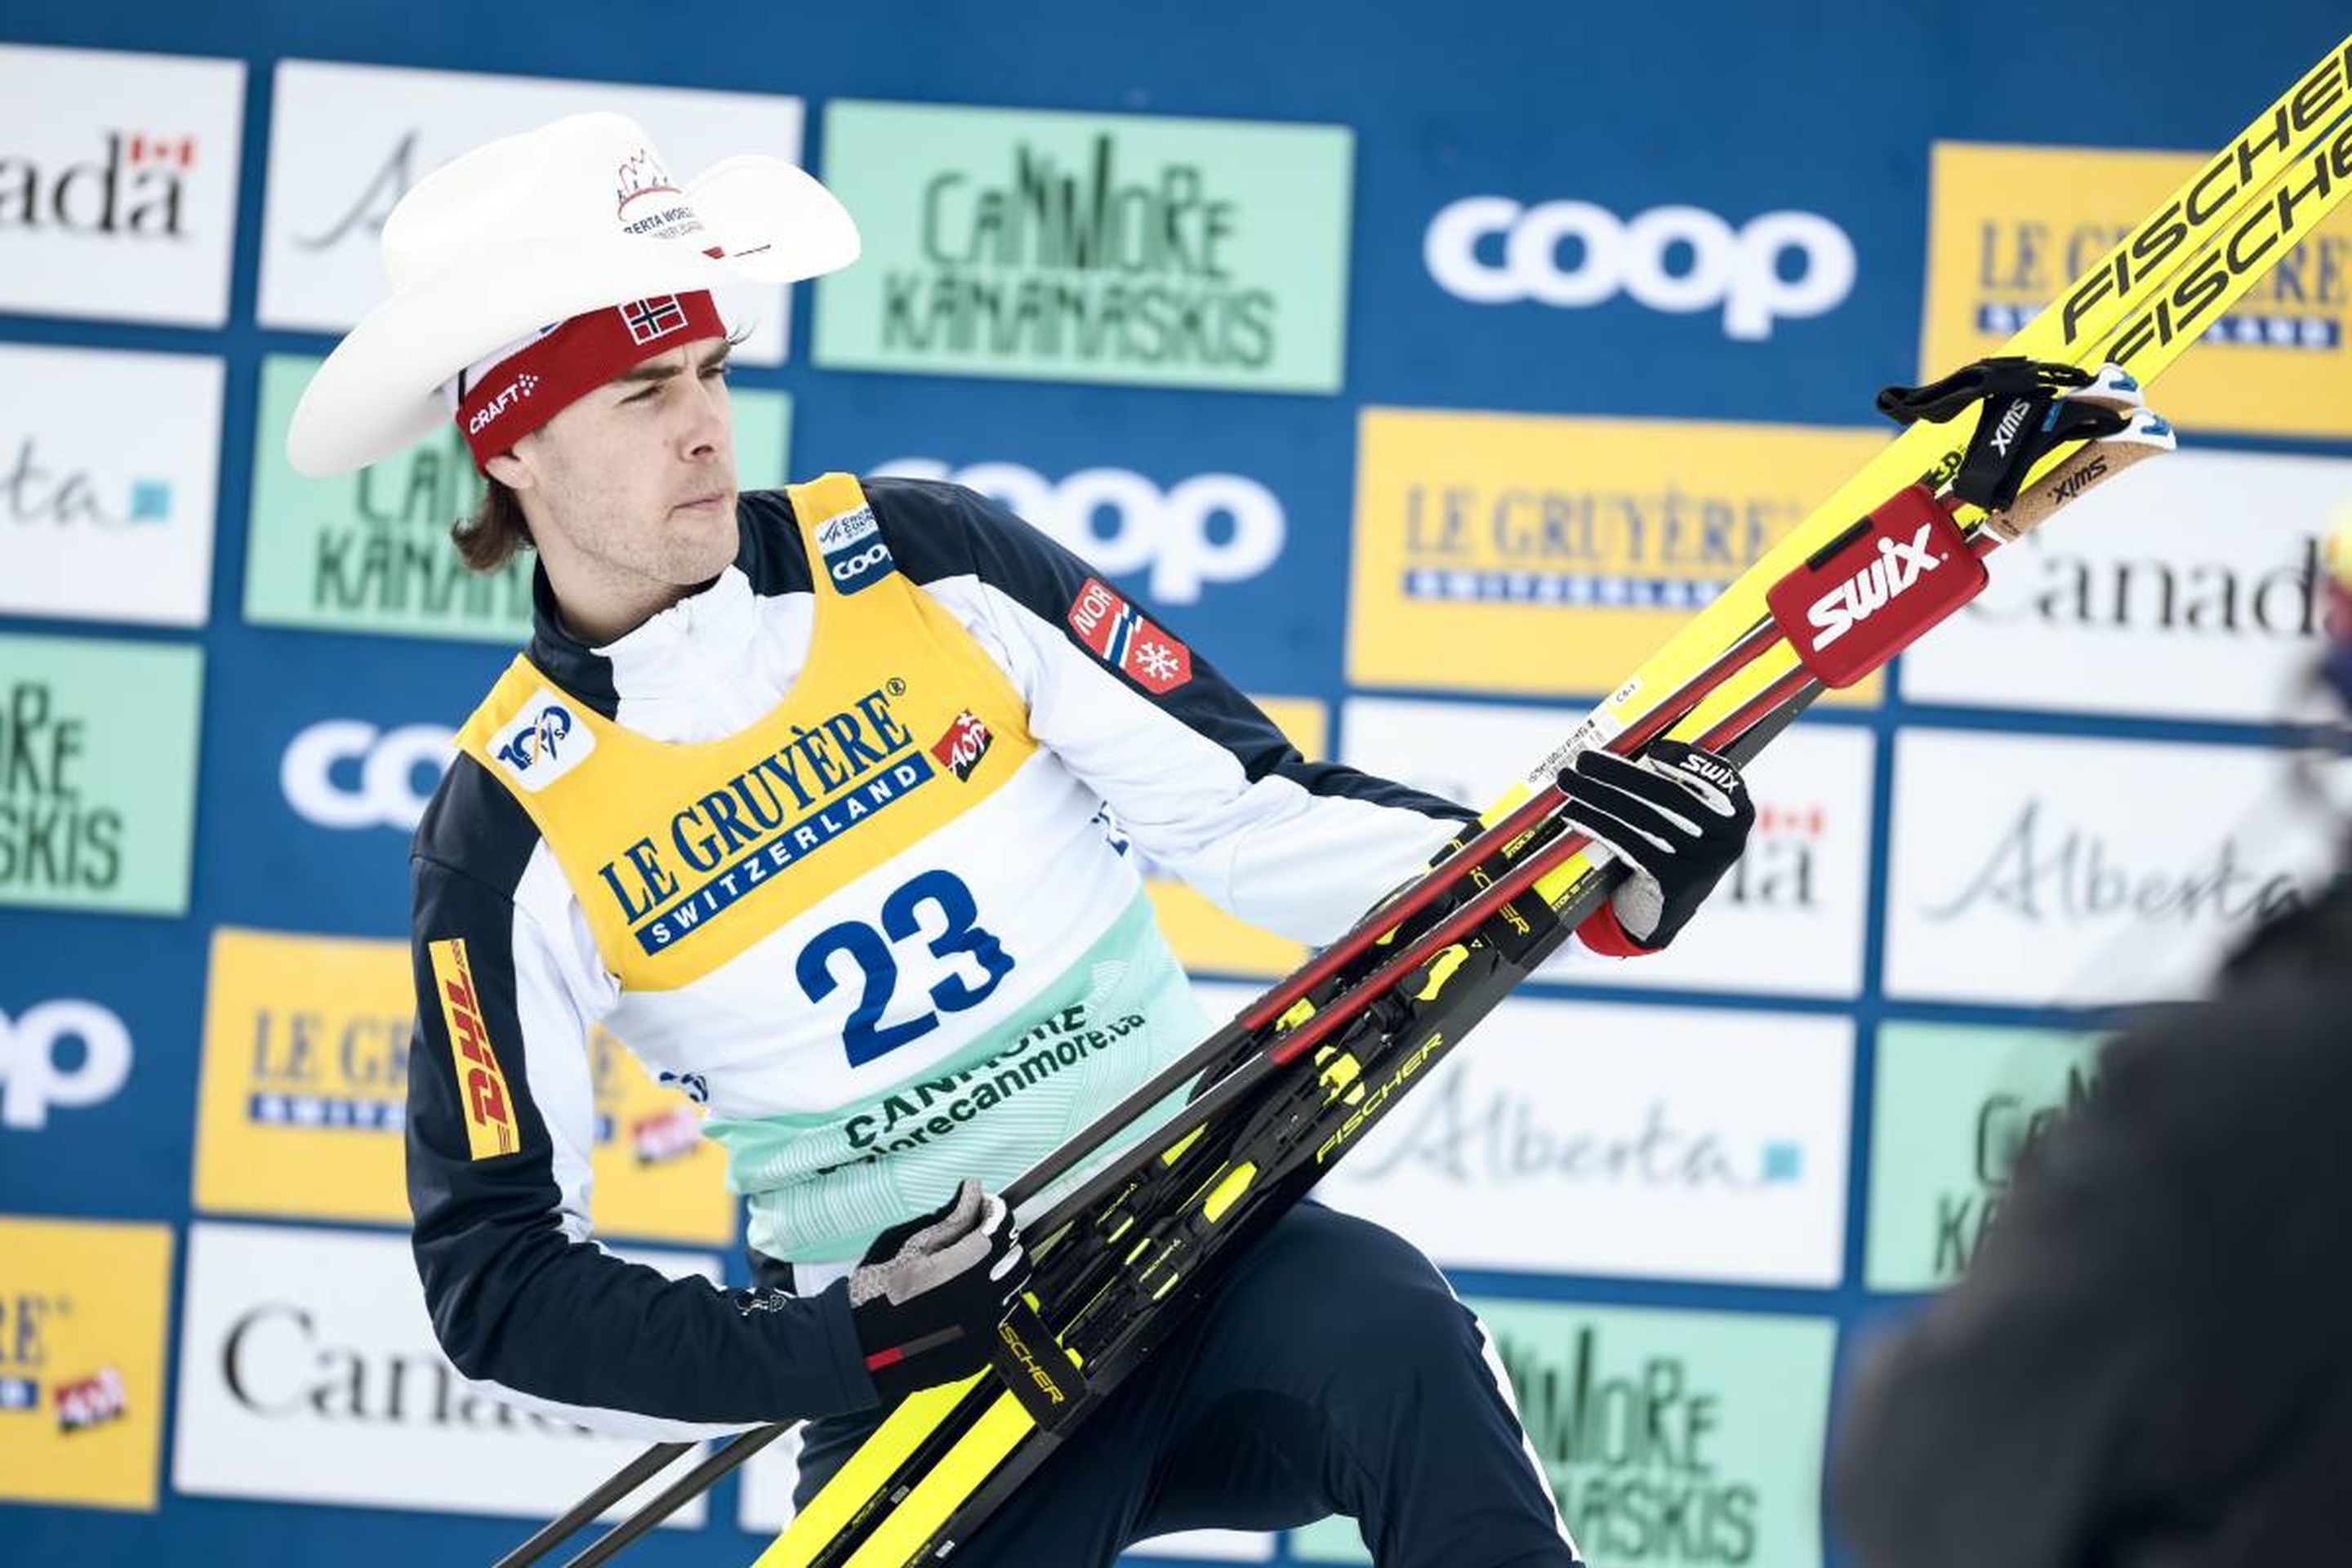 New album about to drop? Mattis Stenshagen (NOR) put on a show as he celebrated his first World Cup podium © NordicFocus